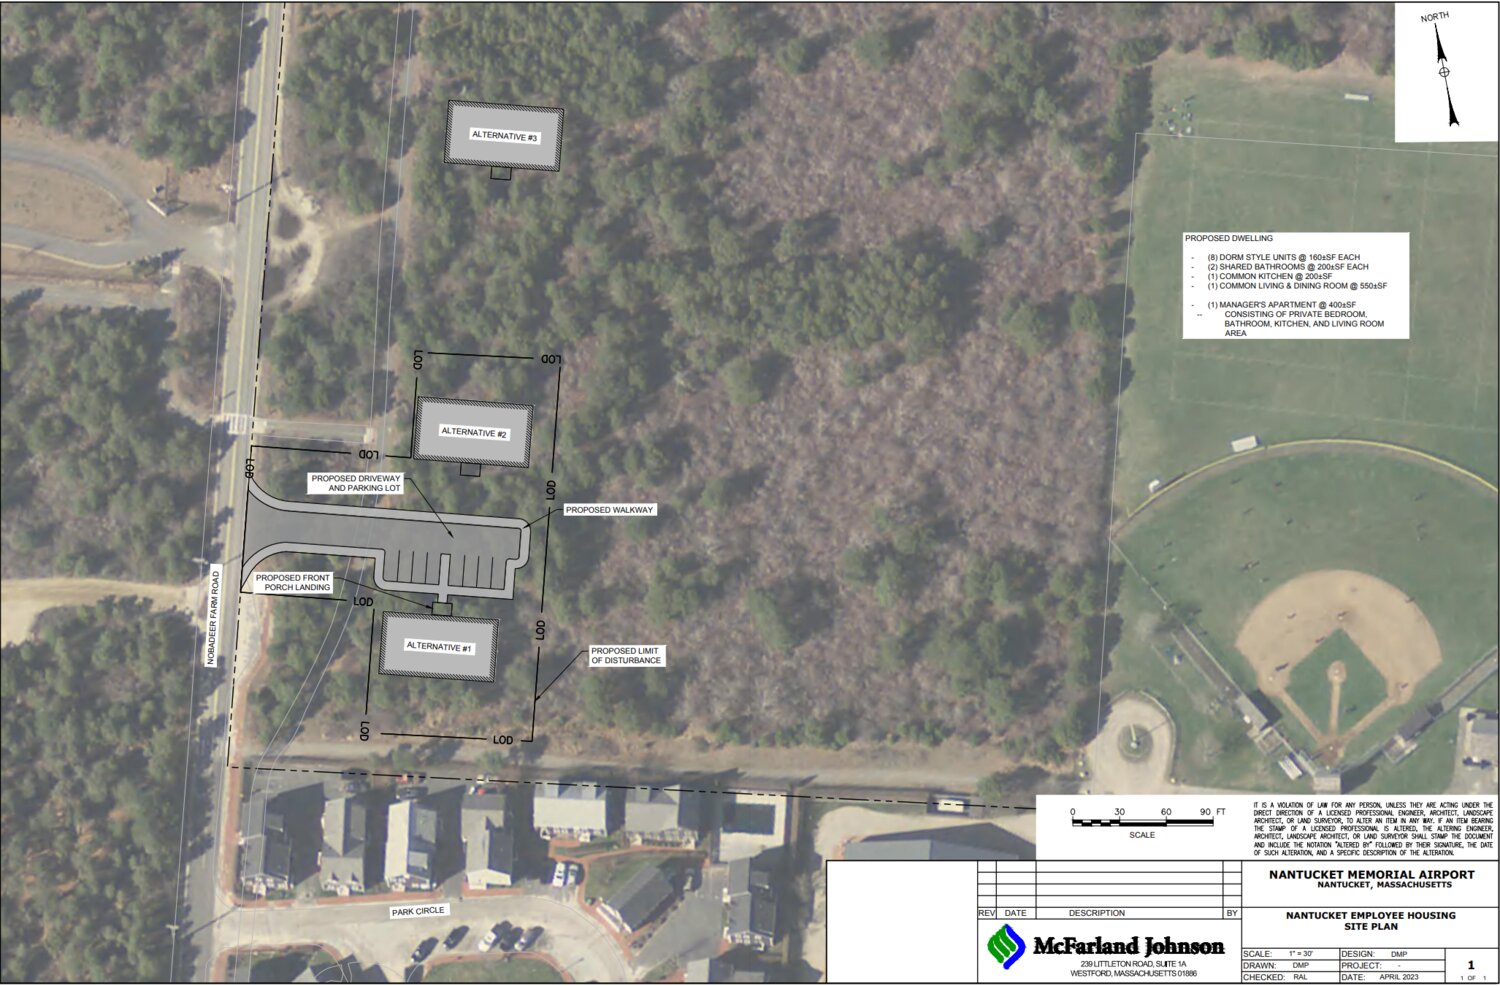 The three boxes represent the proposed locations for airport housing off Nobadeer Farm Road. The Airport Commission chose the option just north of the parking lot. The Park Circle subdivision is to the south.